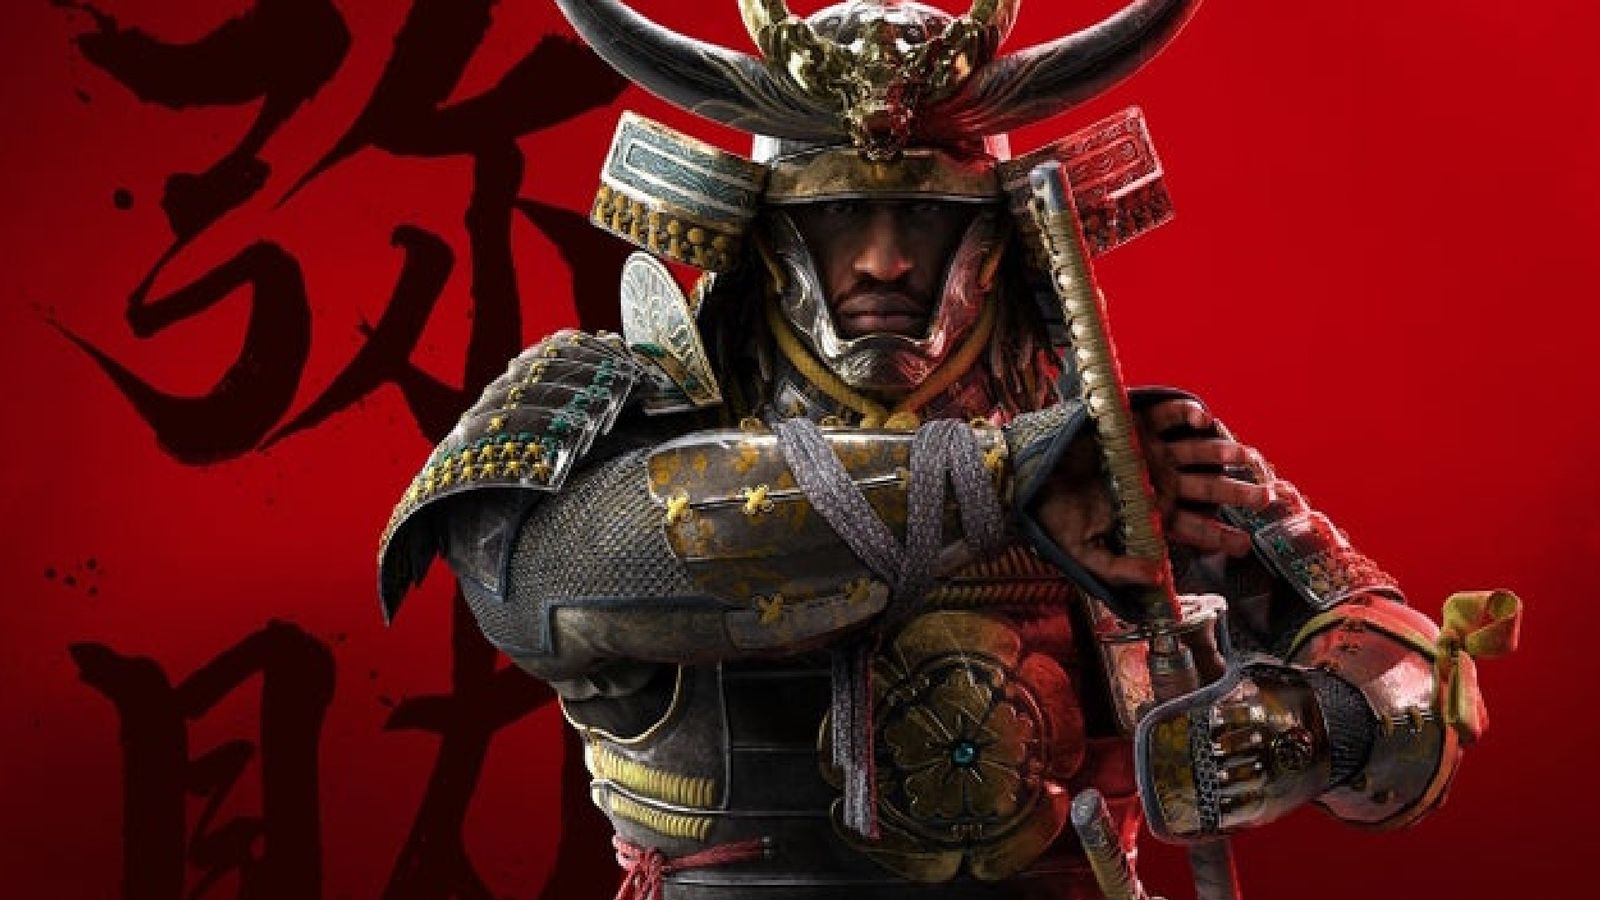 Assassin’s Creed Shadows protagonist Yasuke, a black samurai, standing in front of a red background with painted Japanese characters 